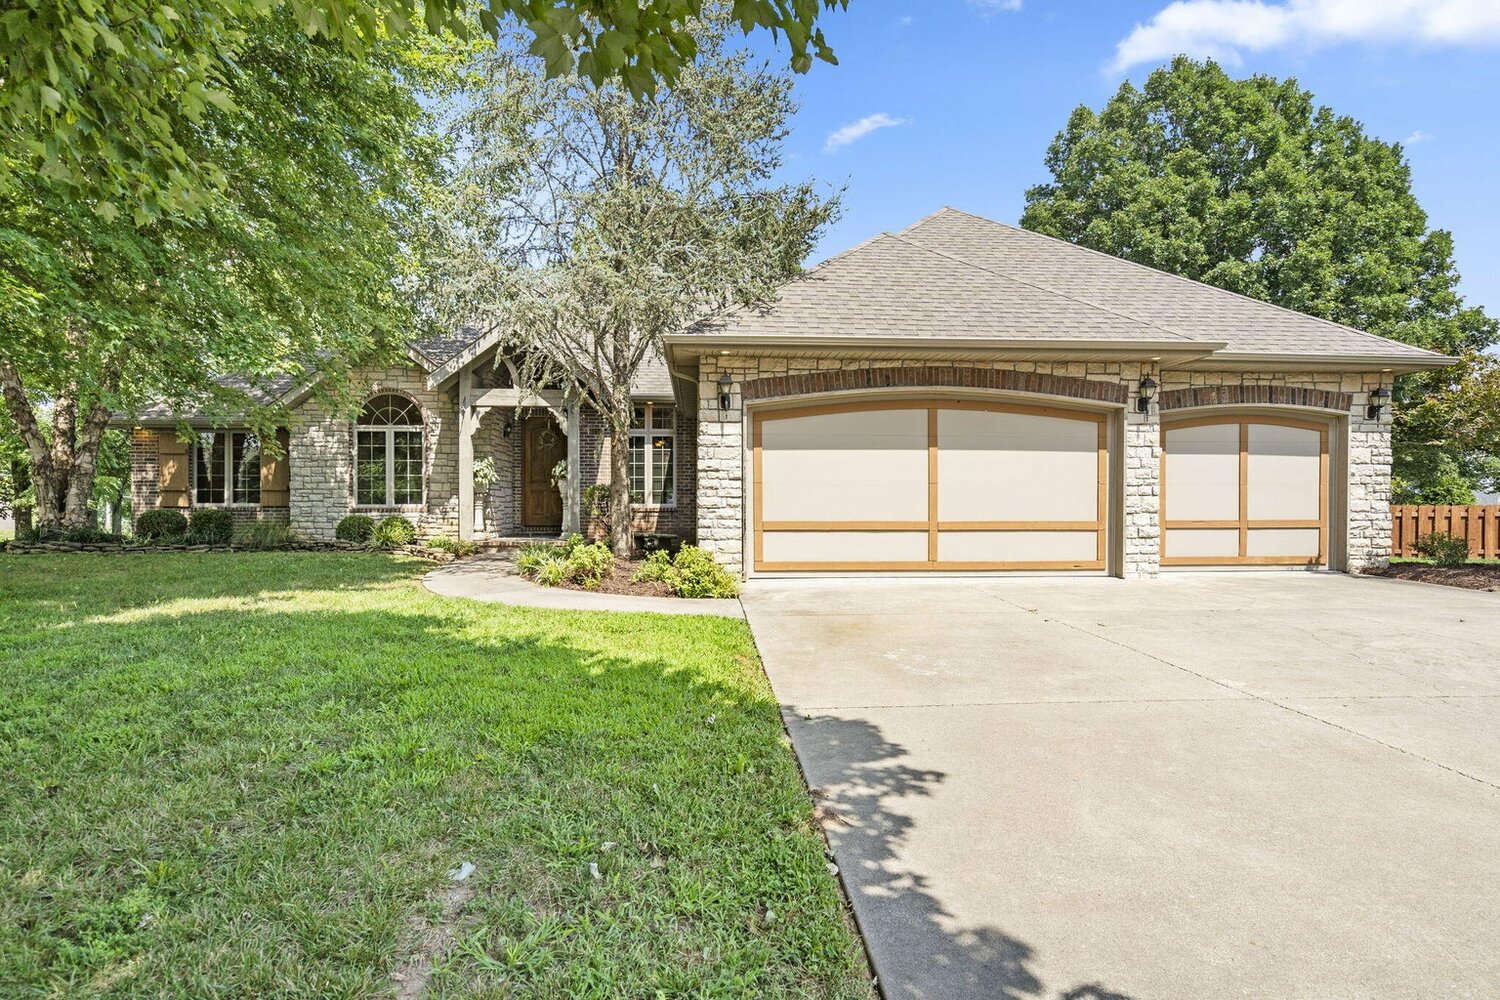 6256 S. Weatherwood Trail
$544,777
Bedrooms: 4
Bathrooms: 3
Listing firm: Coldwell Banker Lewis & Associates